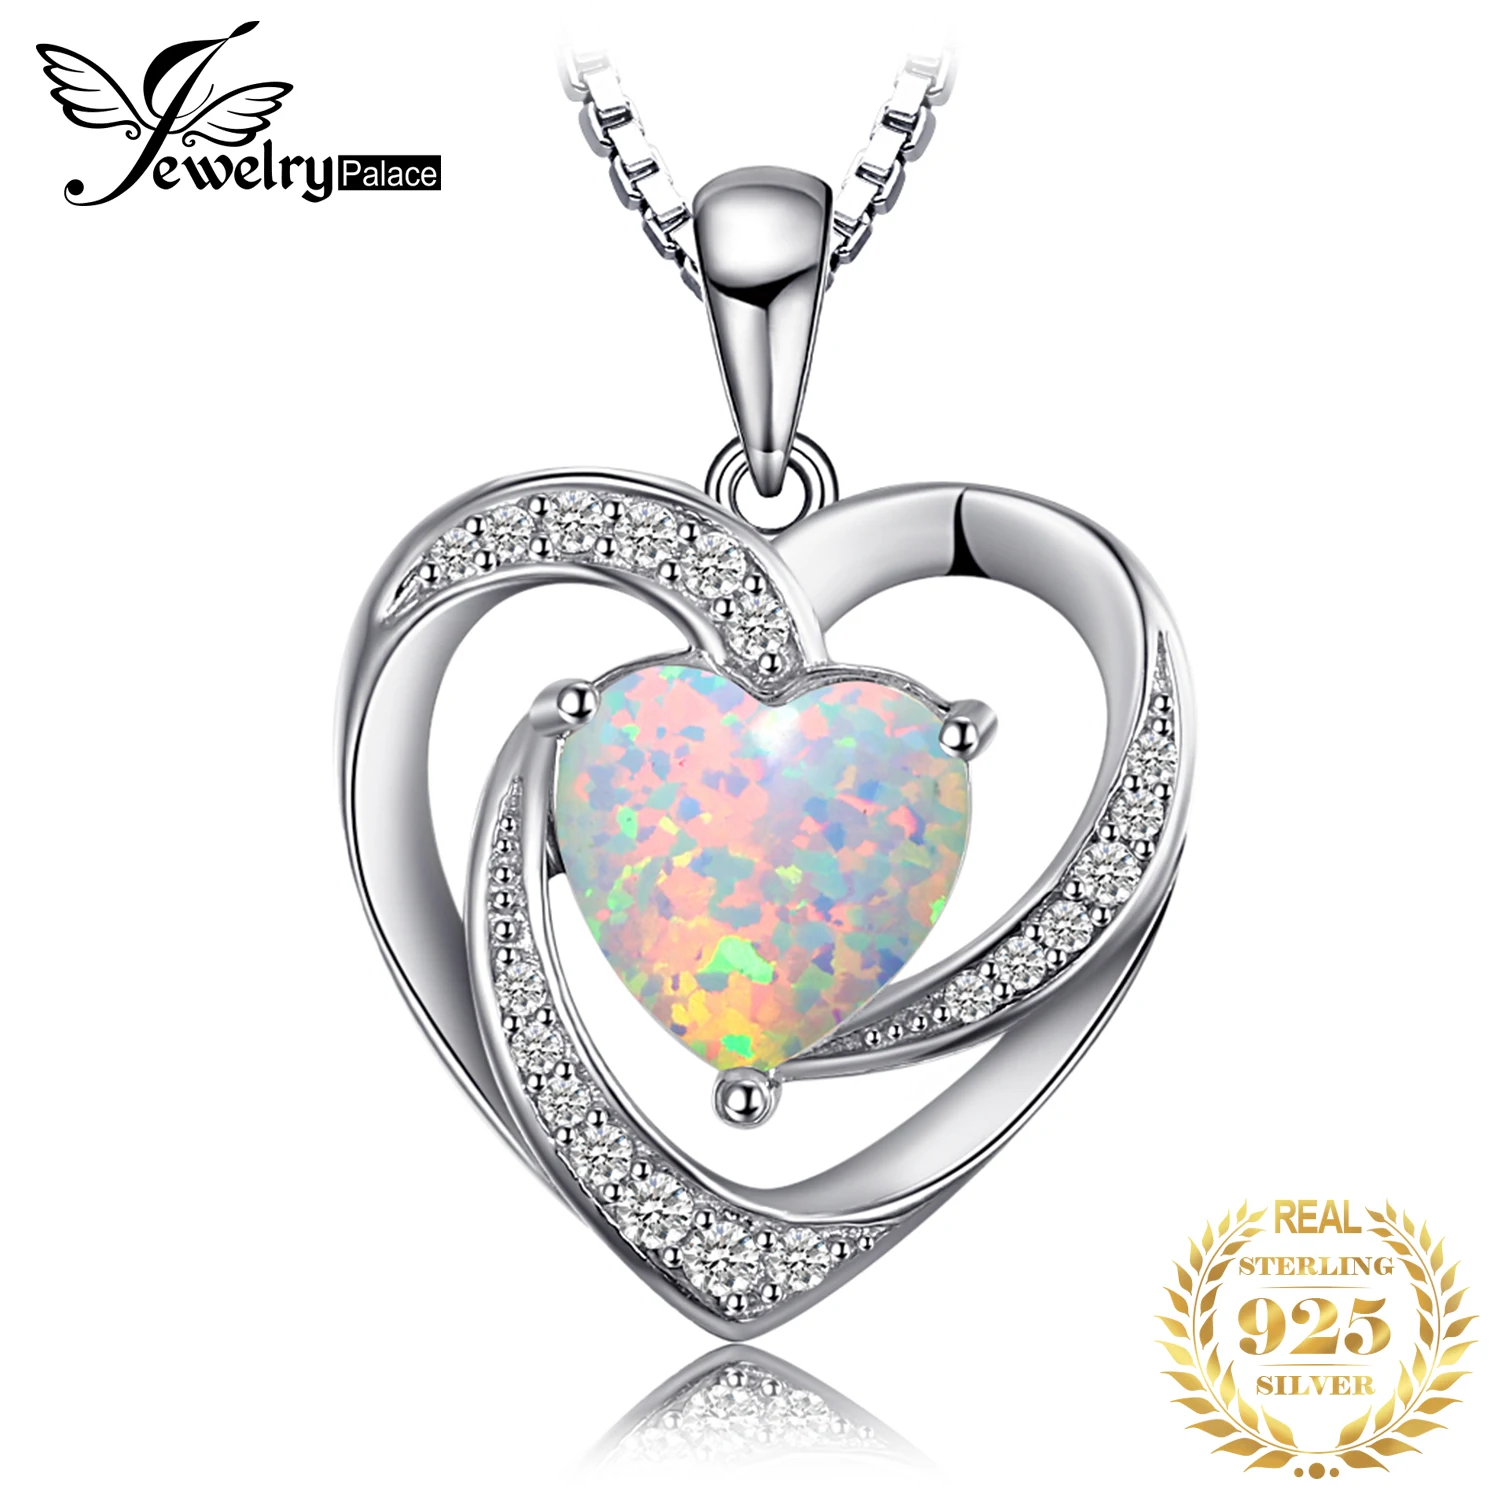 

JewelryPalace Heart Love Created Opal Pendant Necklace Gemstone 925 Sterling Silver Pendant for Women Fashion Jewelry No Chain